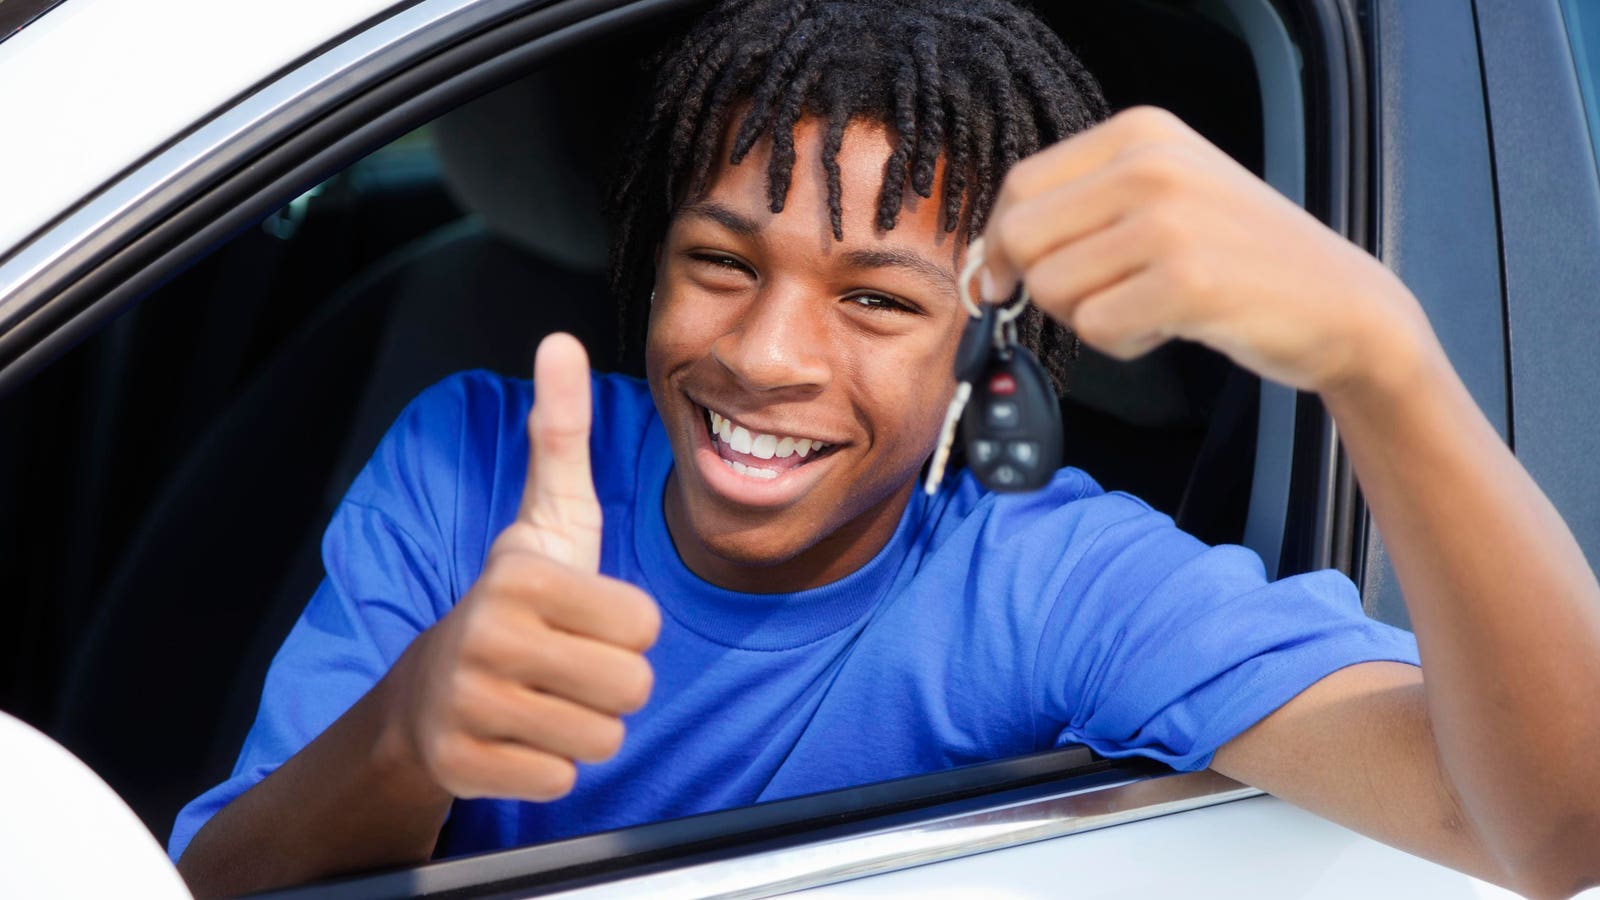 Here’s Where Data Shows Insuring A Teenage Driver Is Virtually Unaffordable